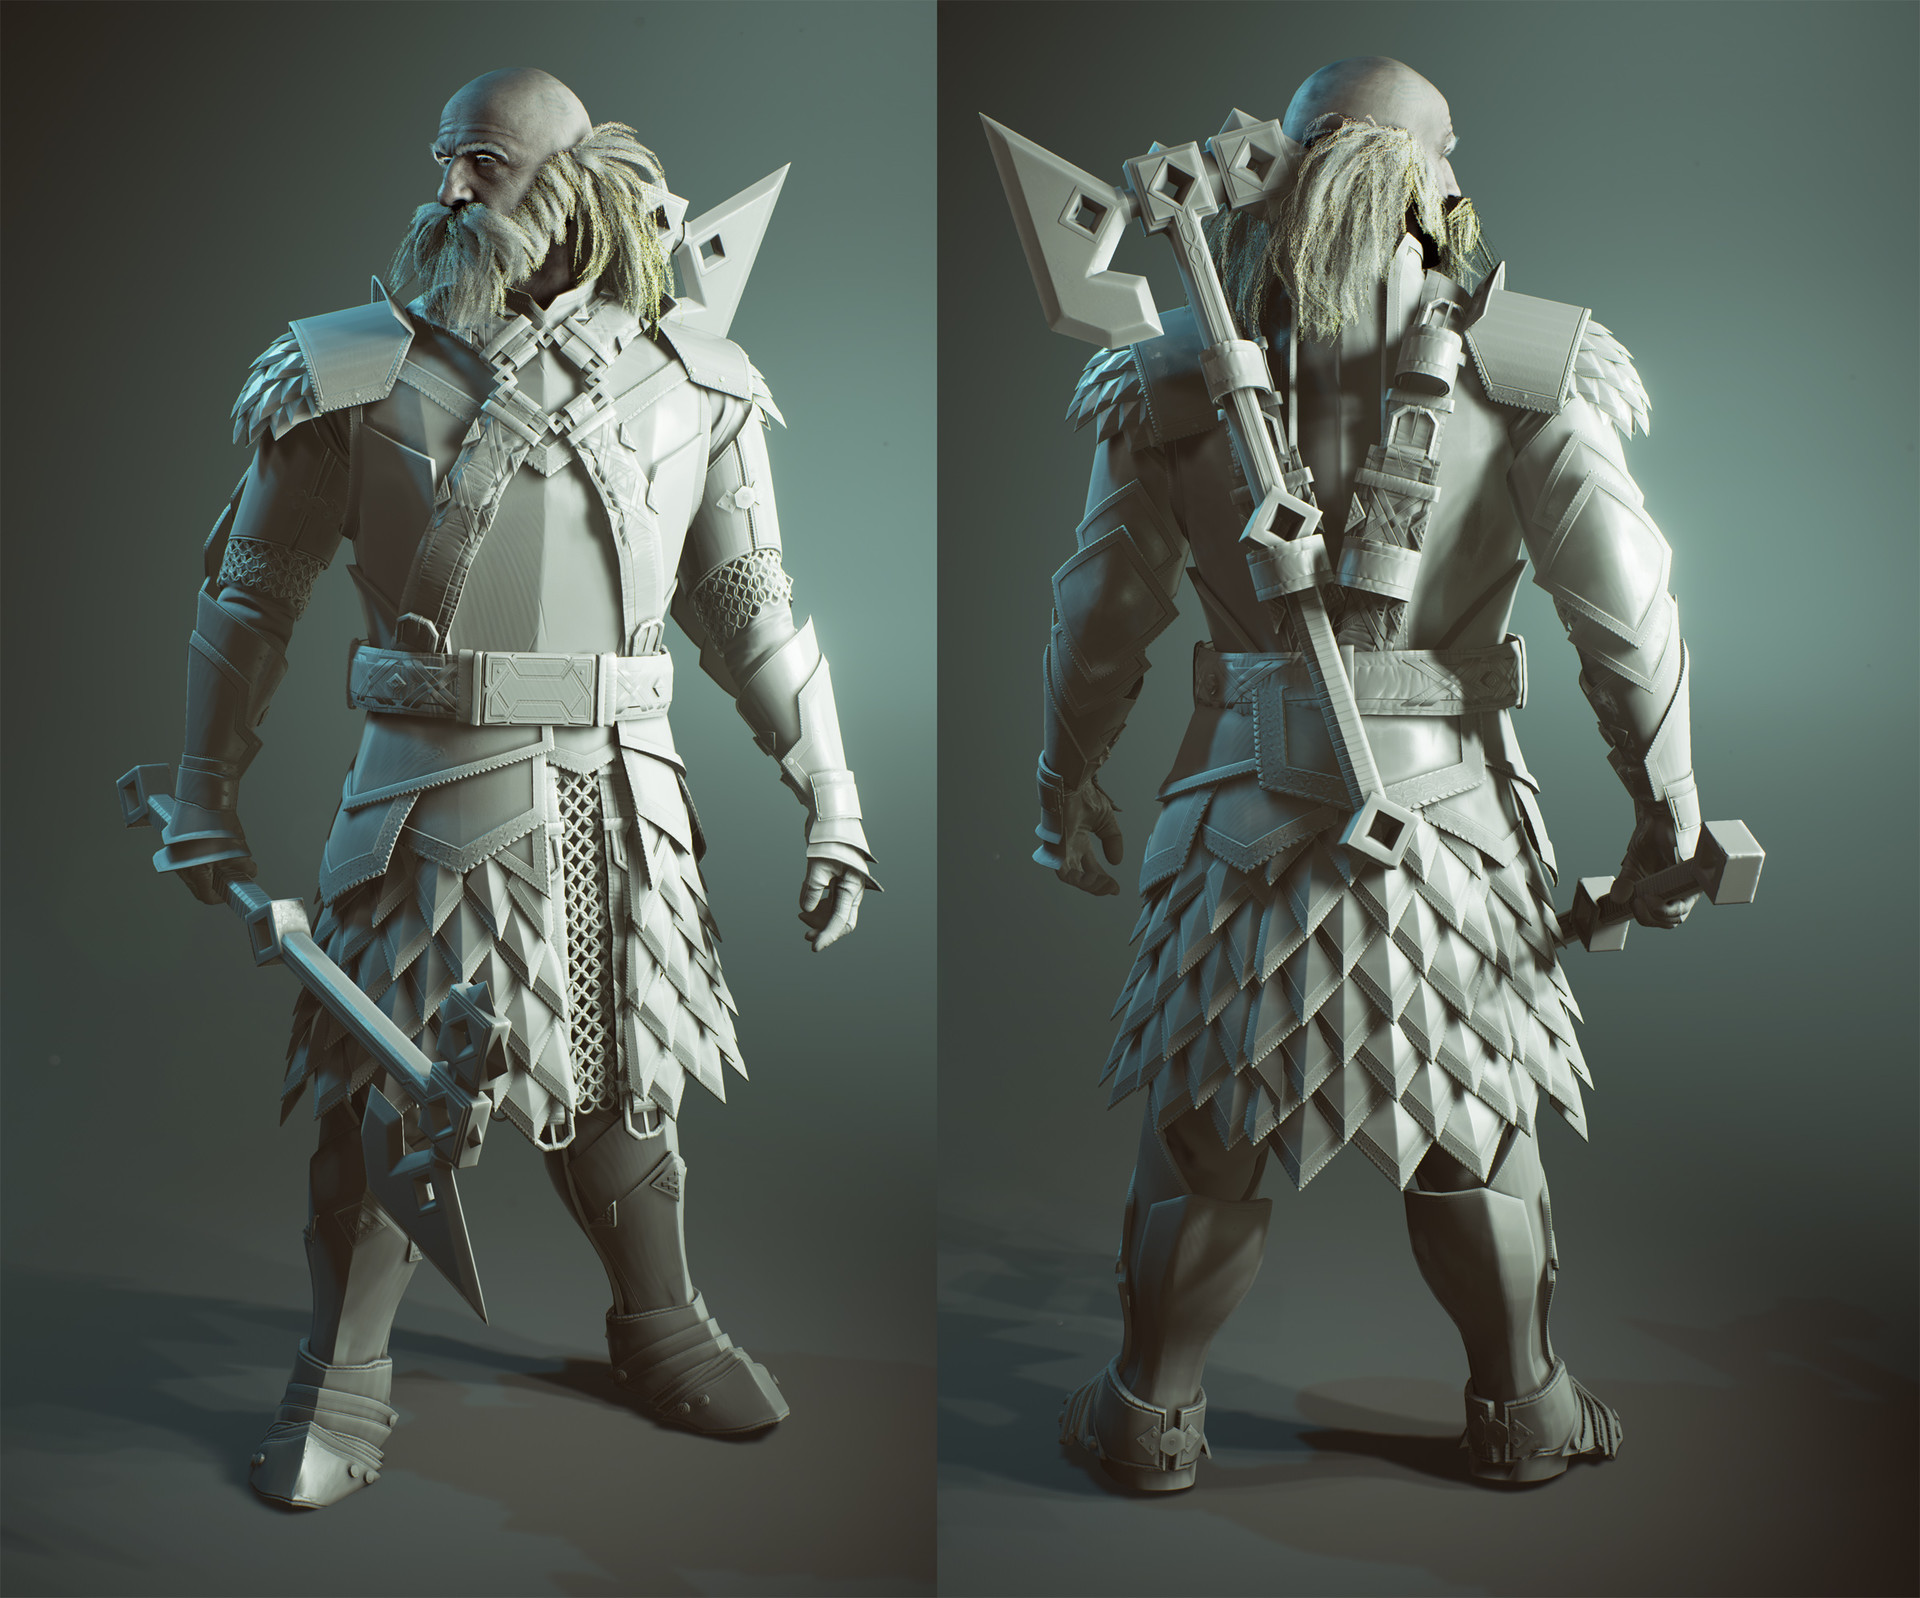 Dwarf Dwalin Realtime Model created in Unreal engine 4